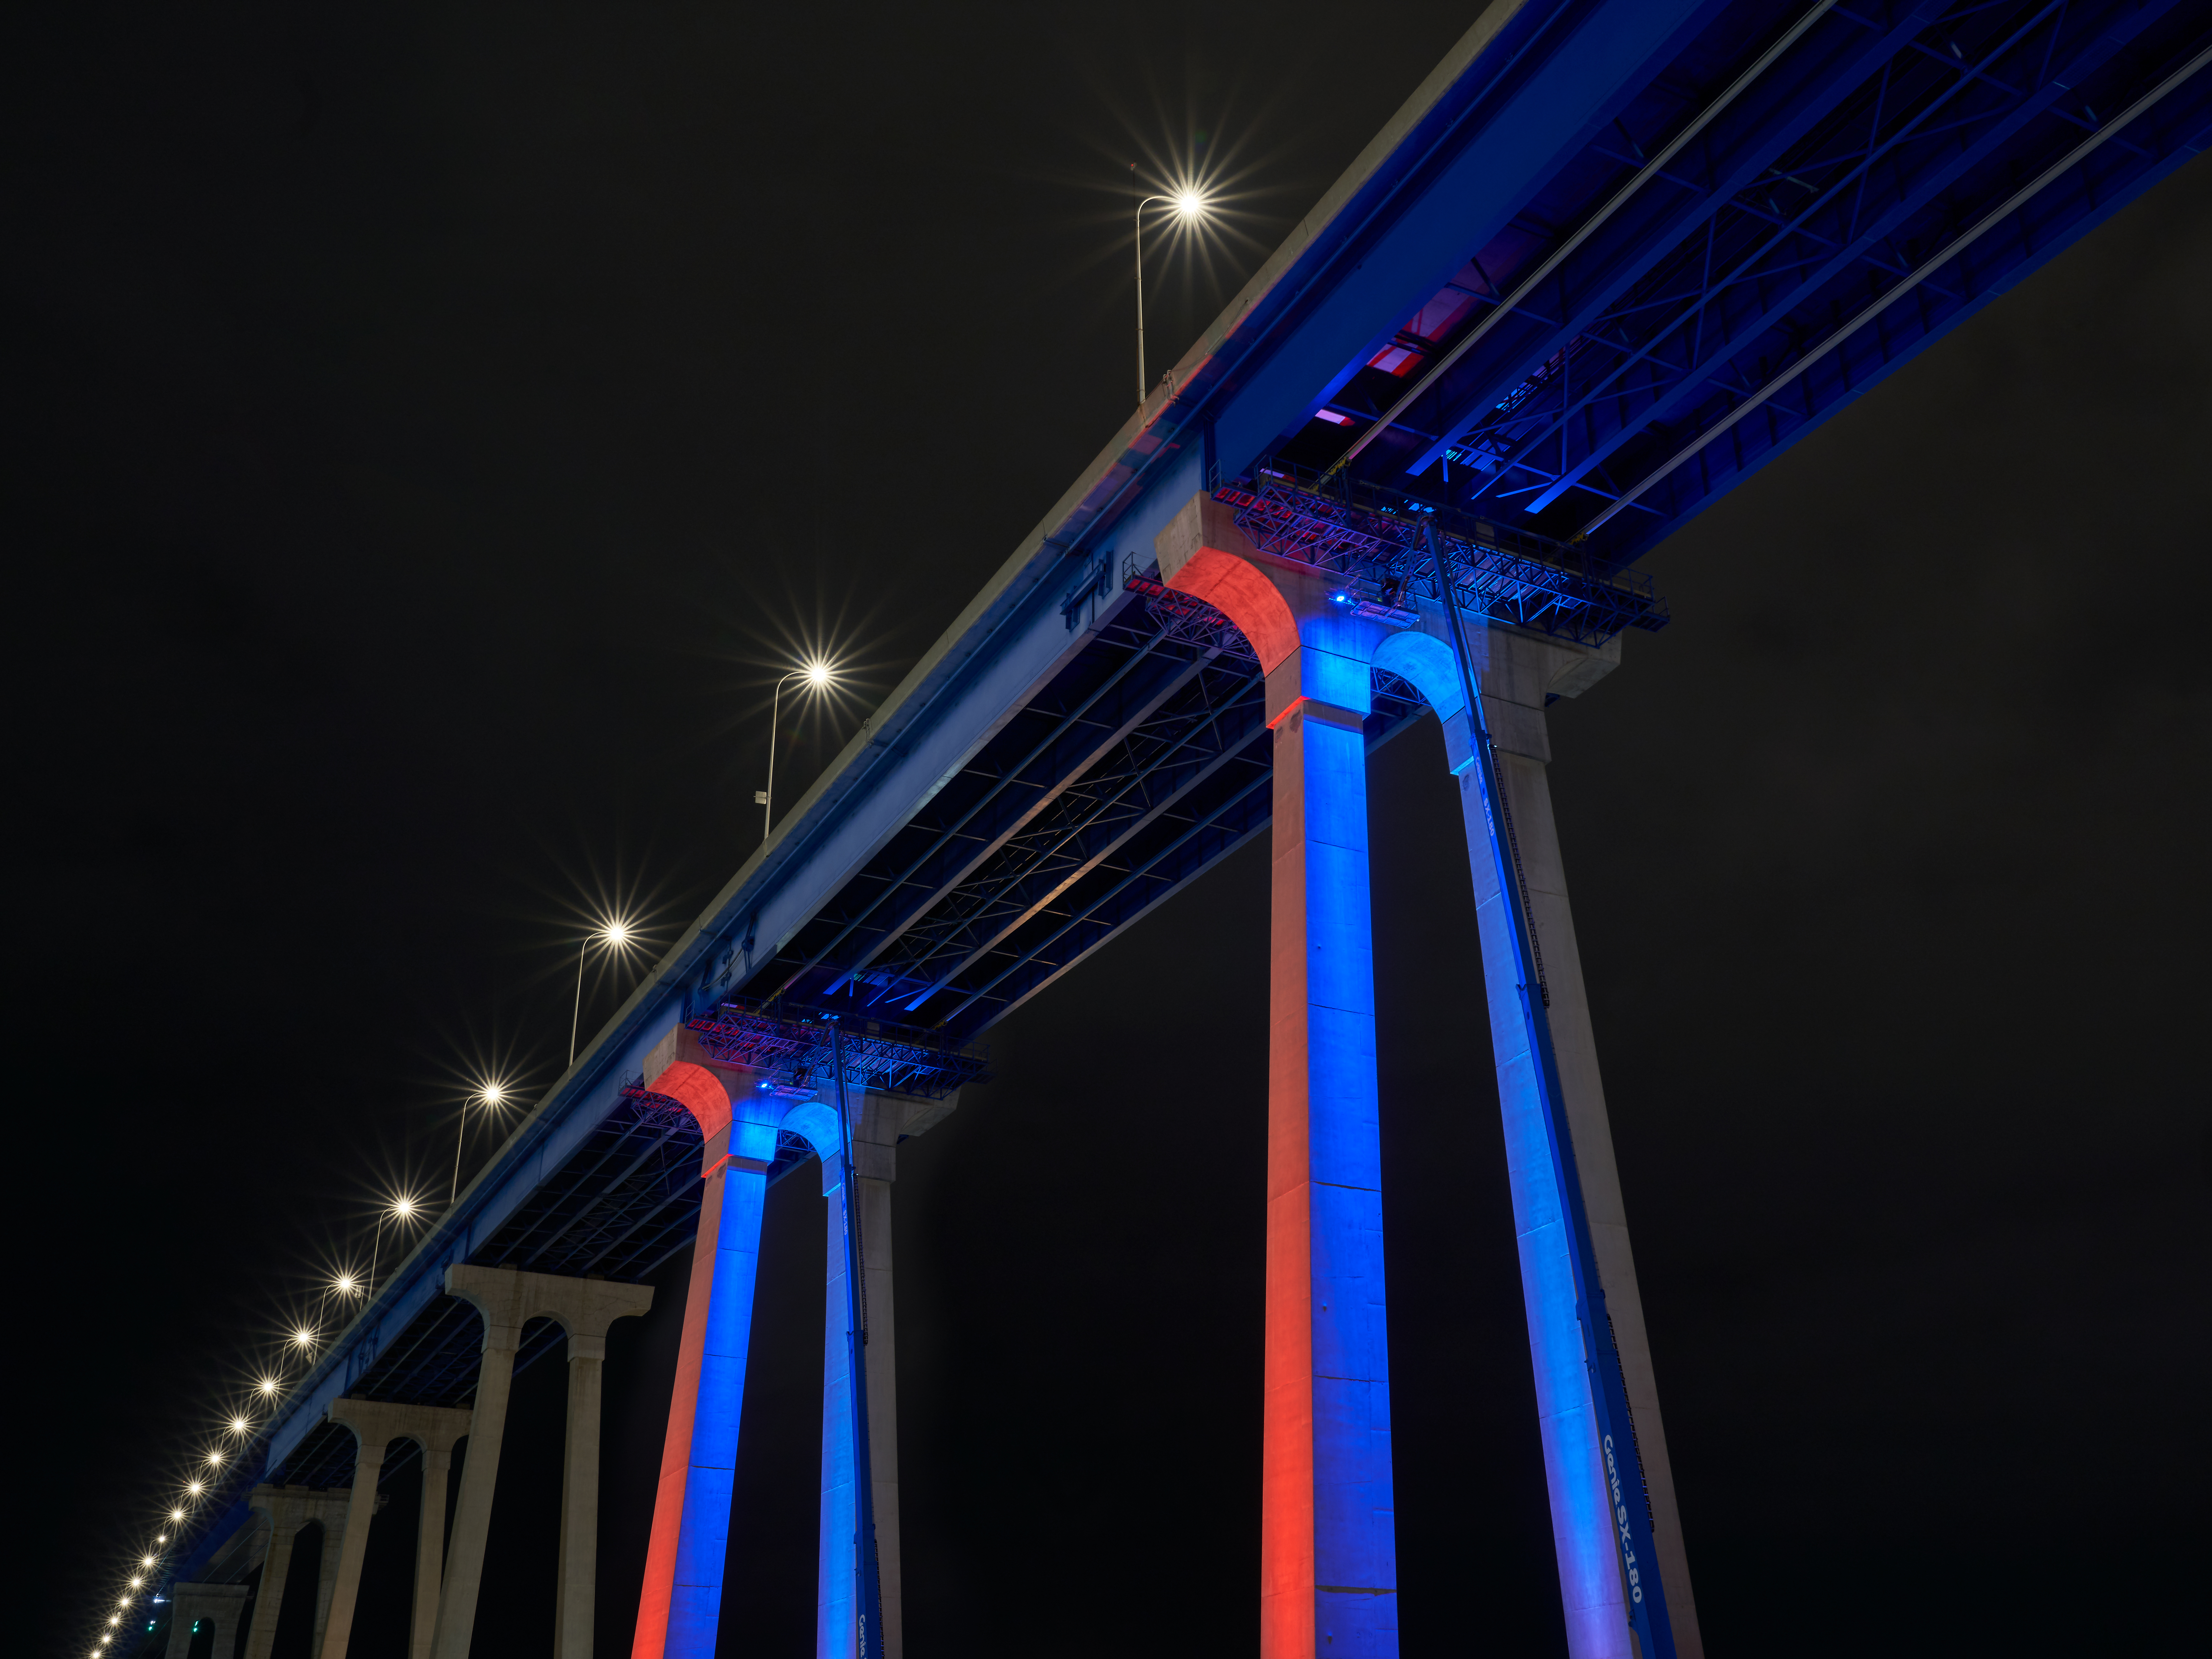 The study was designed to simultaneously illuminate two of the bridge’s supporting concrete piers with color LED lighting units. (Photo courtesy of Port of San Diego)